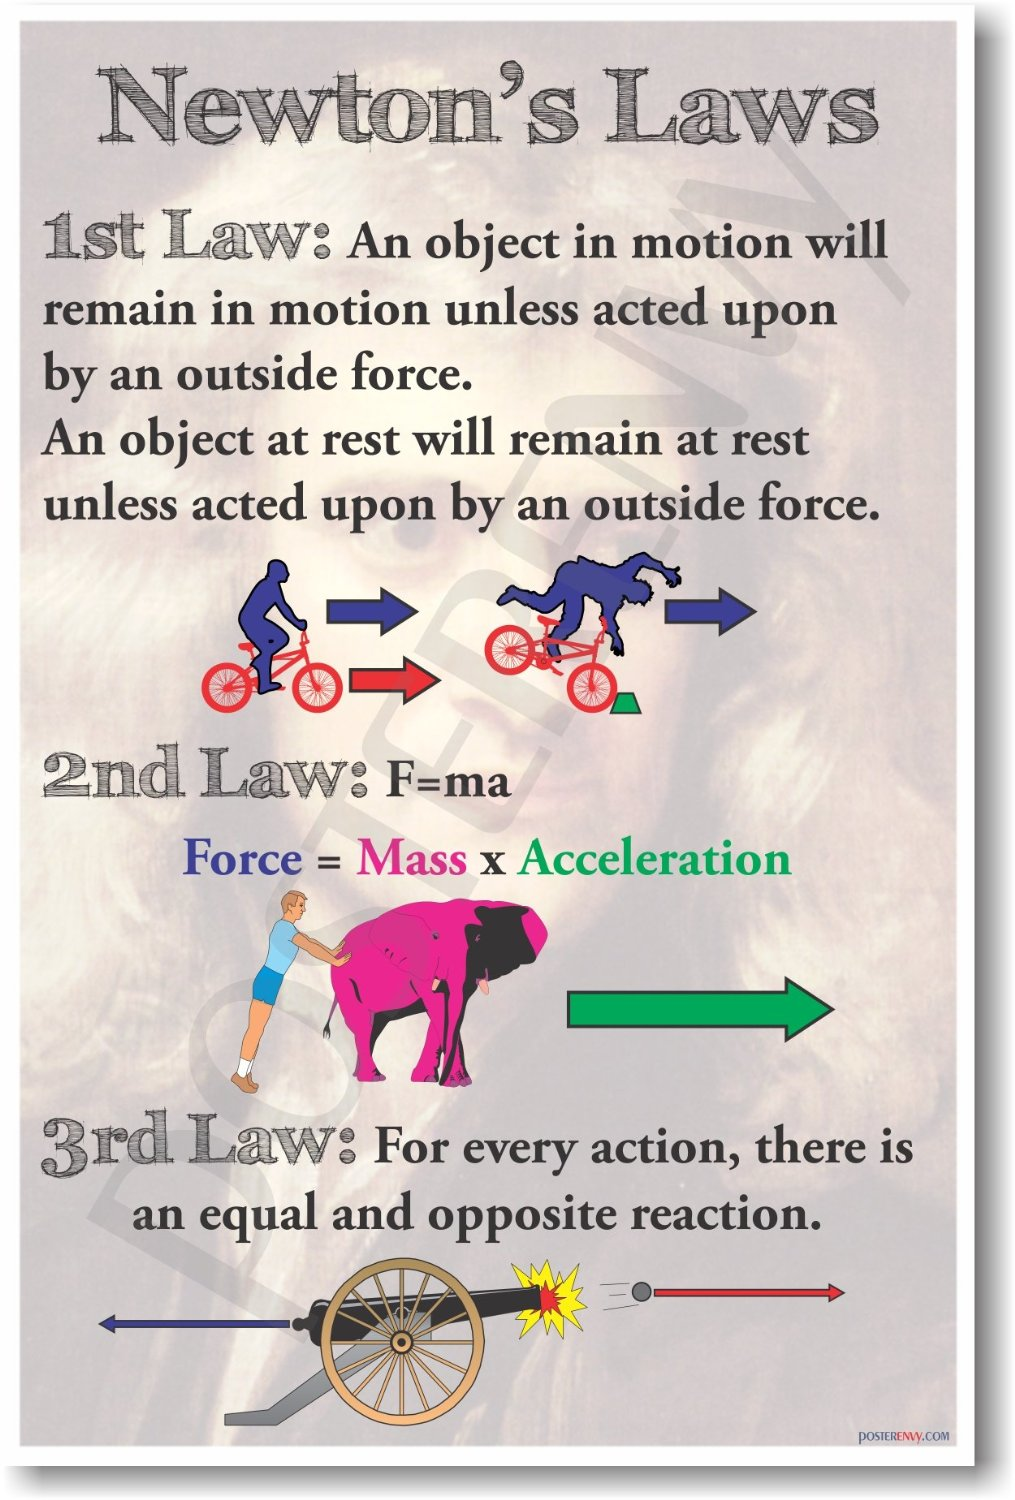 newtons three laws of motion